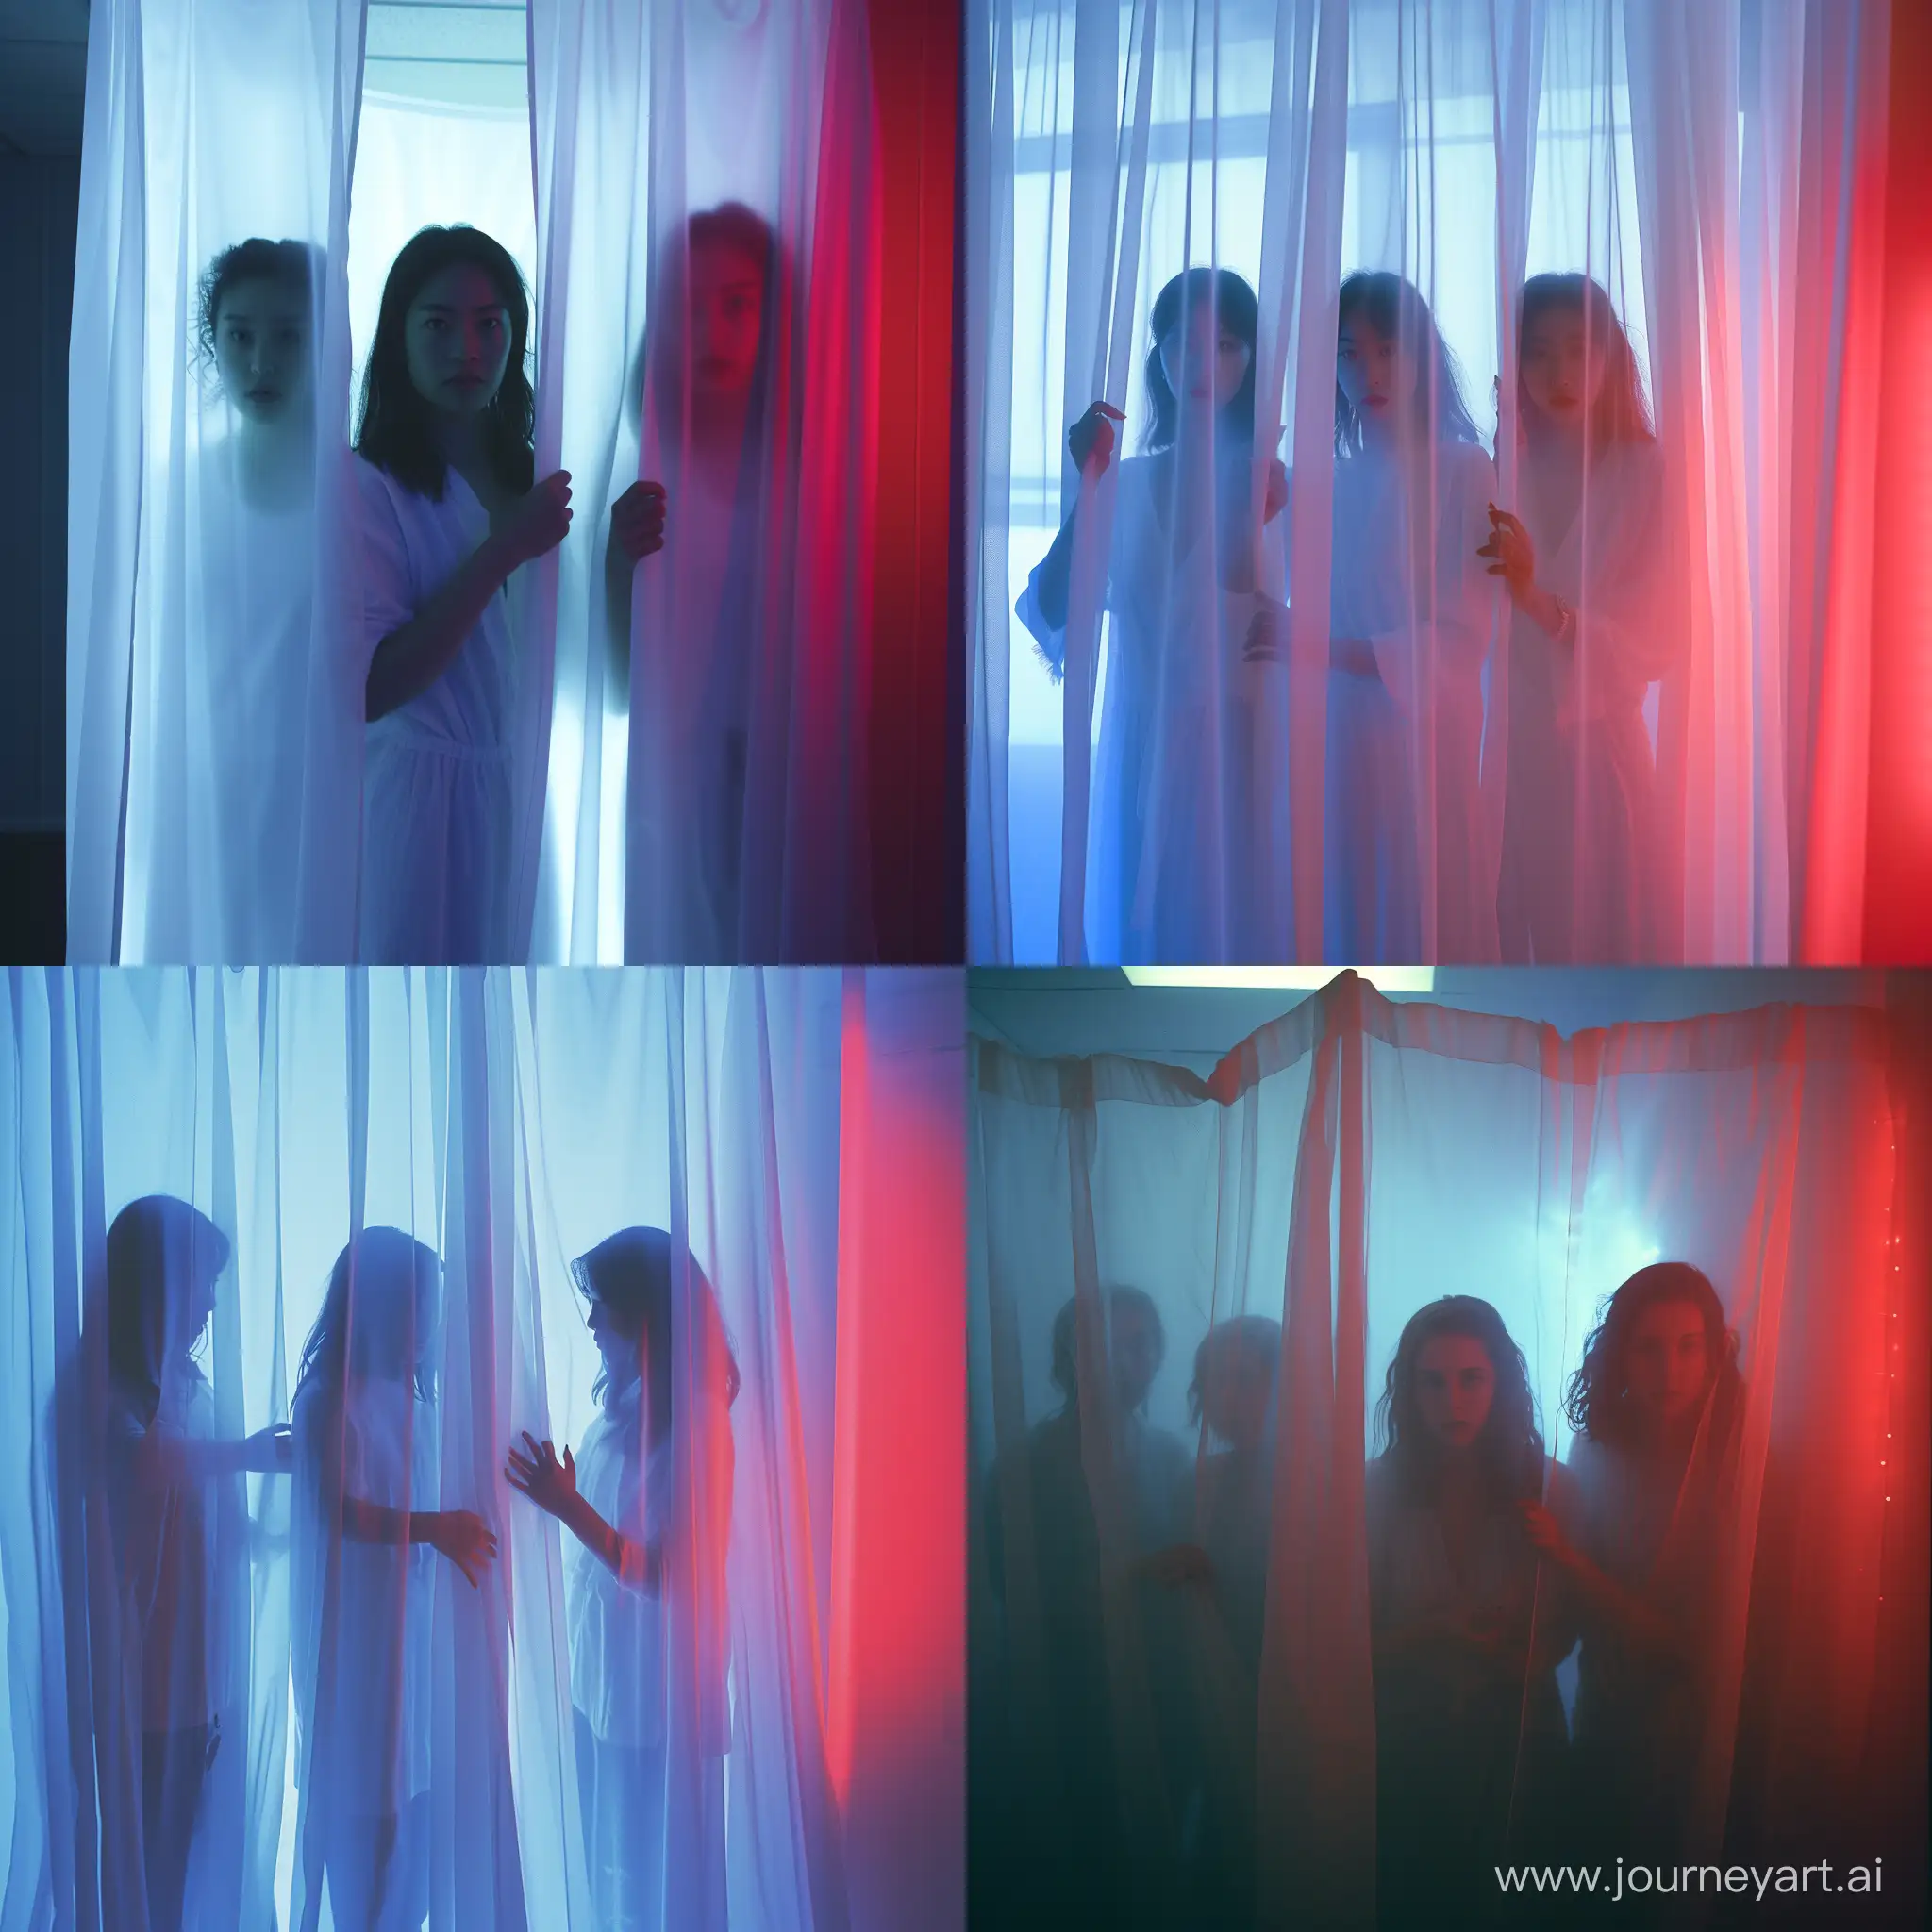 3 woman behind white slightly transparent curtain,  One back light on the right red color, Second back light blue color on the left and direct light above  casting shadows on to curtain, we can see only silhoulette . They look like want to go through curtain, we can see their hands on curtain